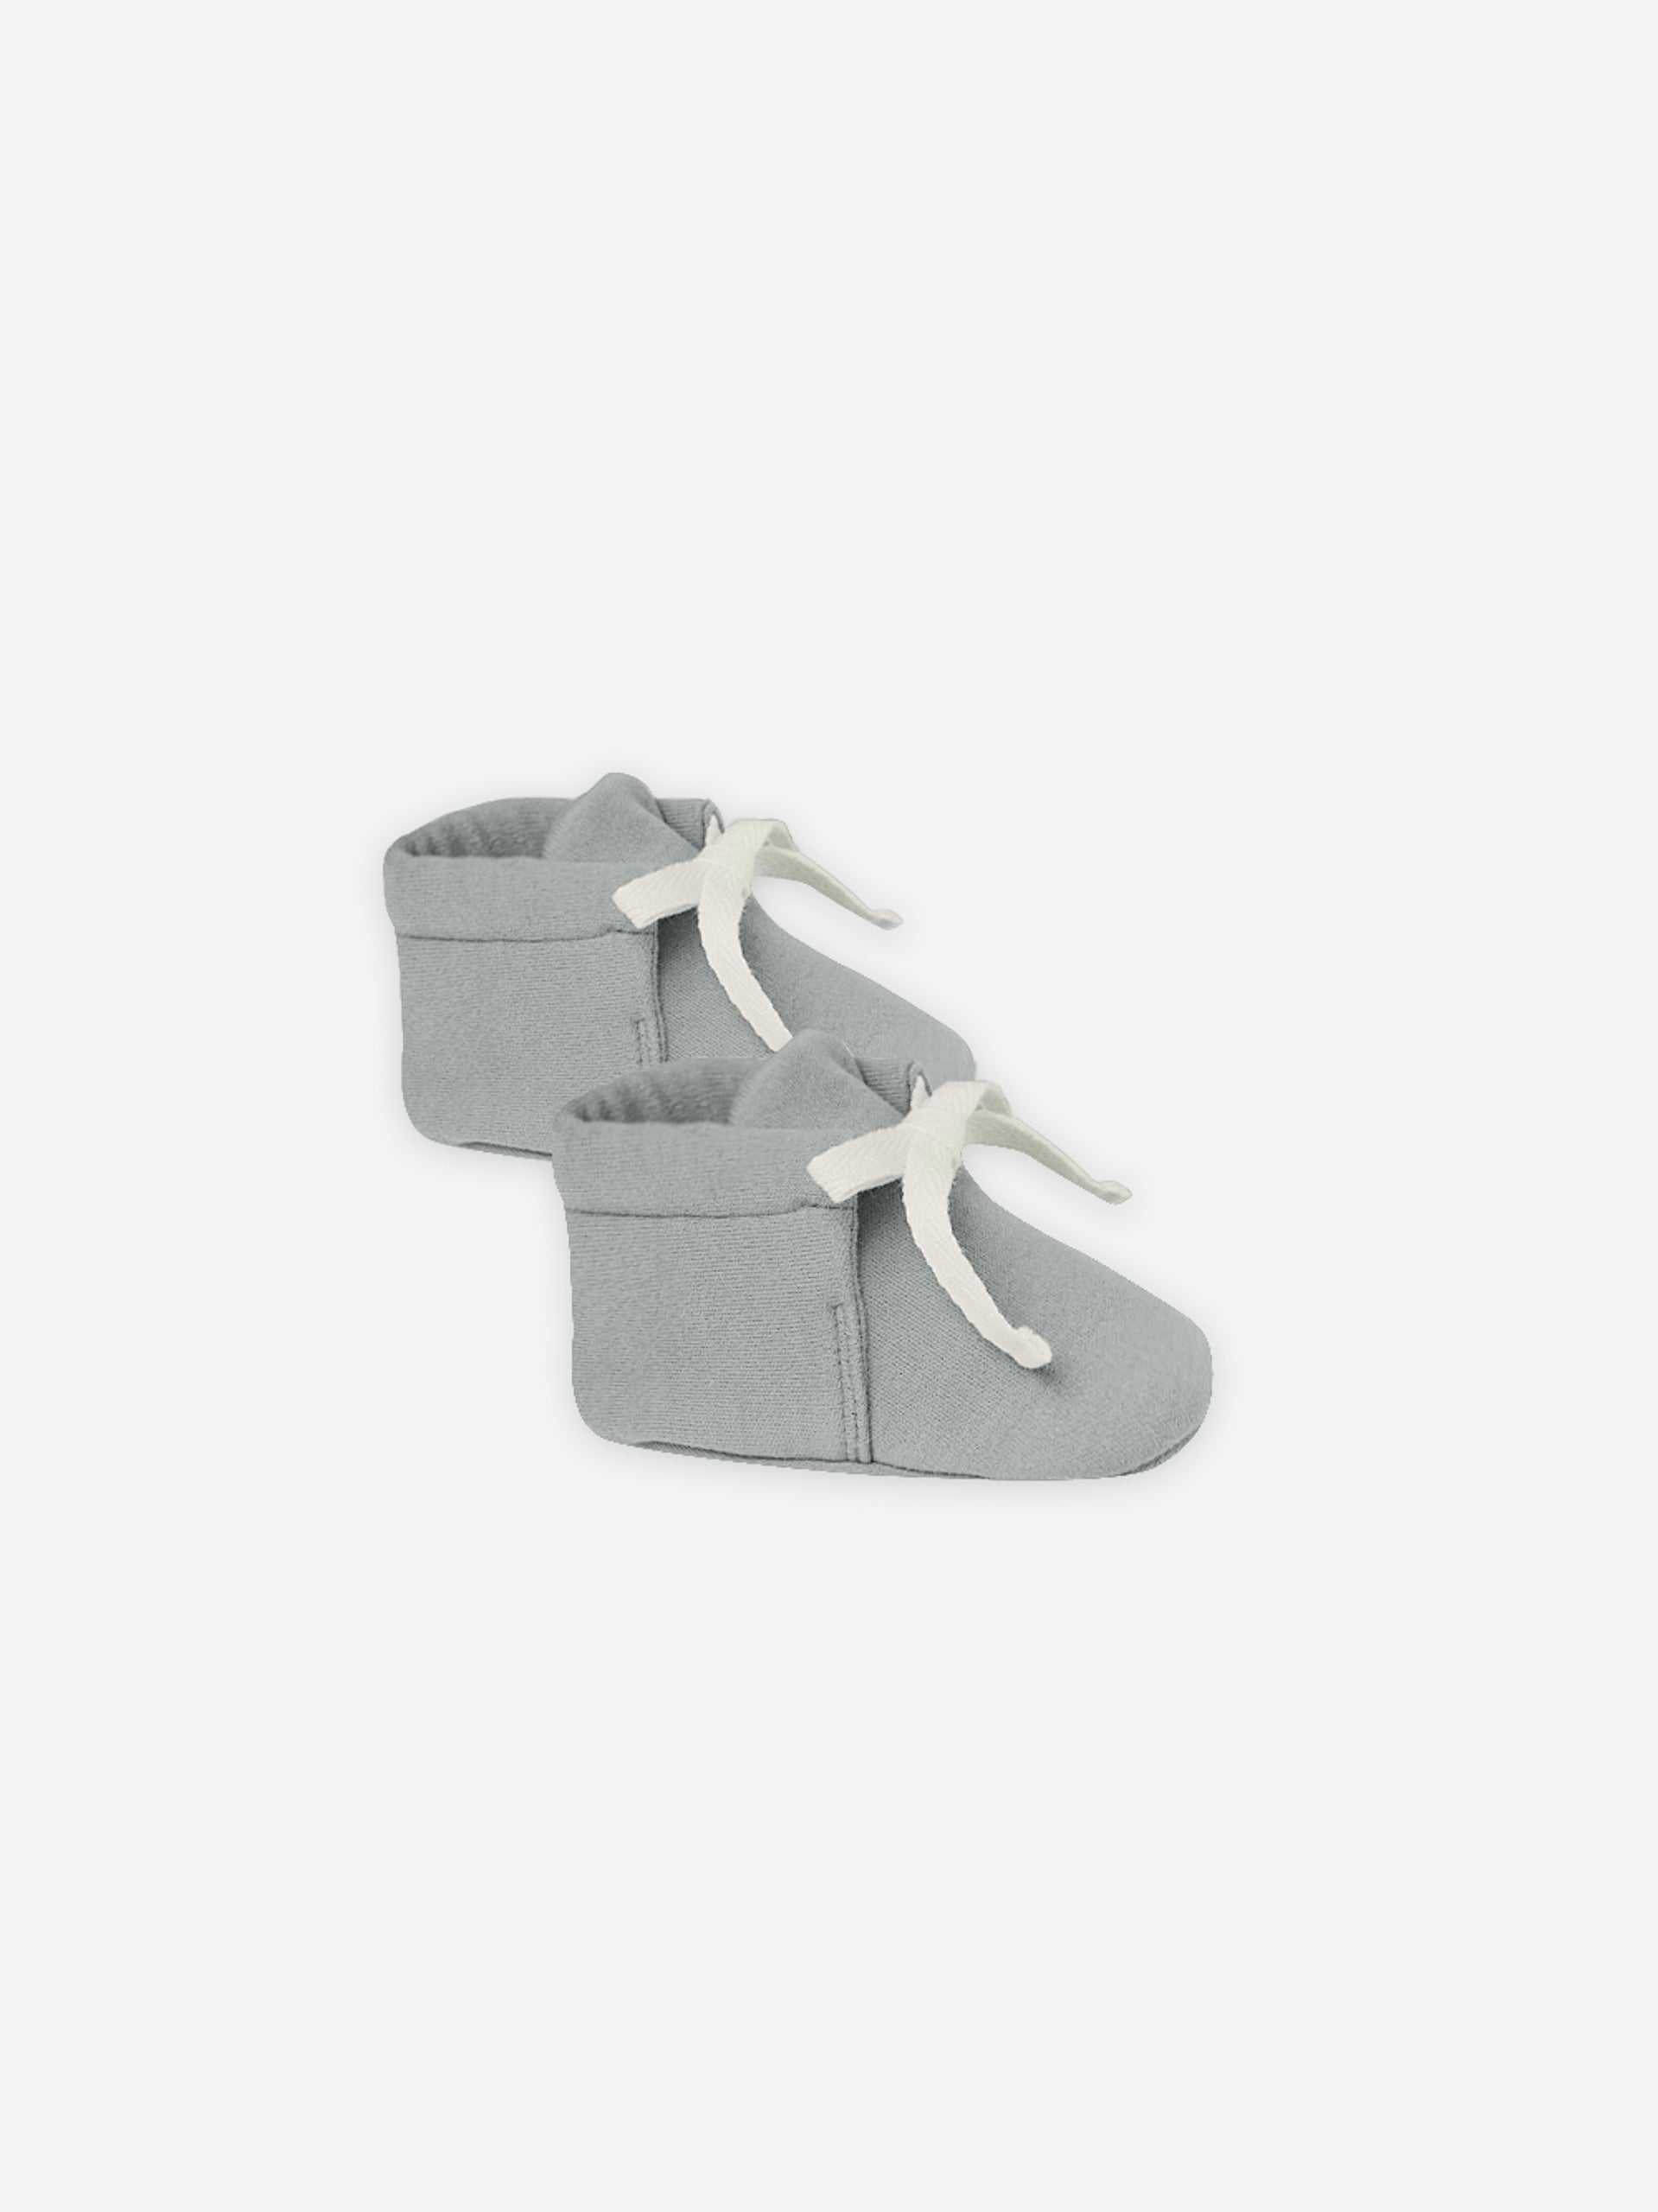 Baby Booties || Dusty Blue - Rylee + Cru | Kids Clothes | Trendy Baby Clothes | Modern Infant Outfits |